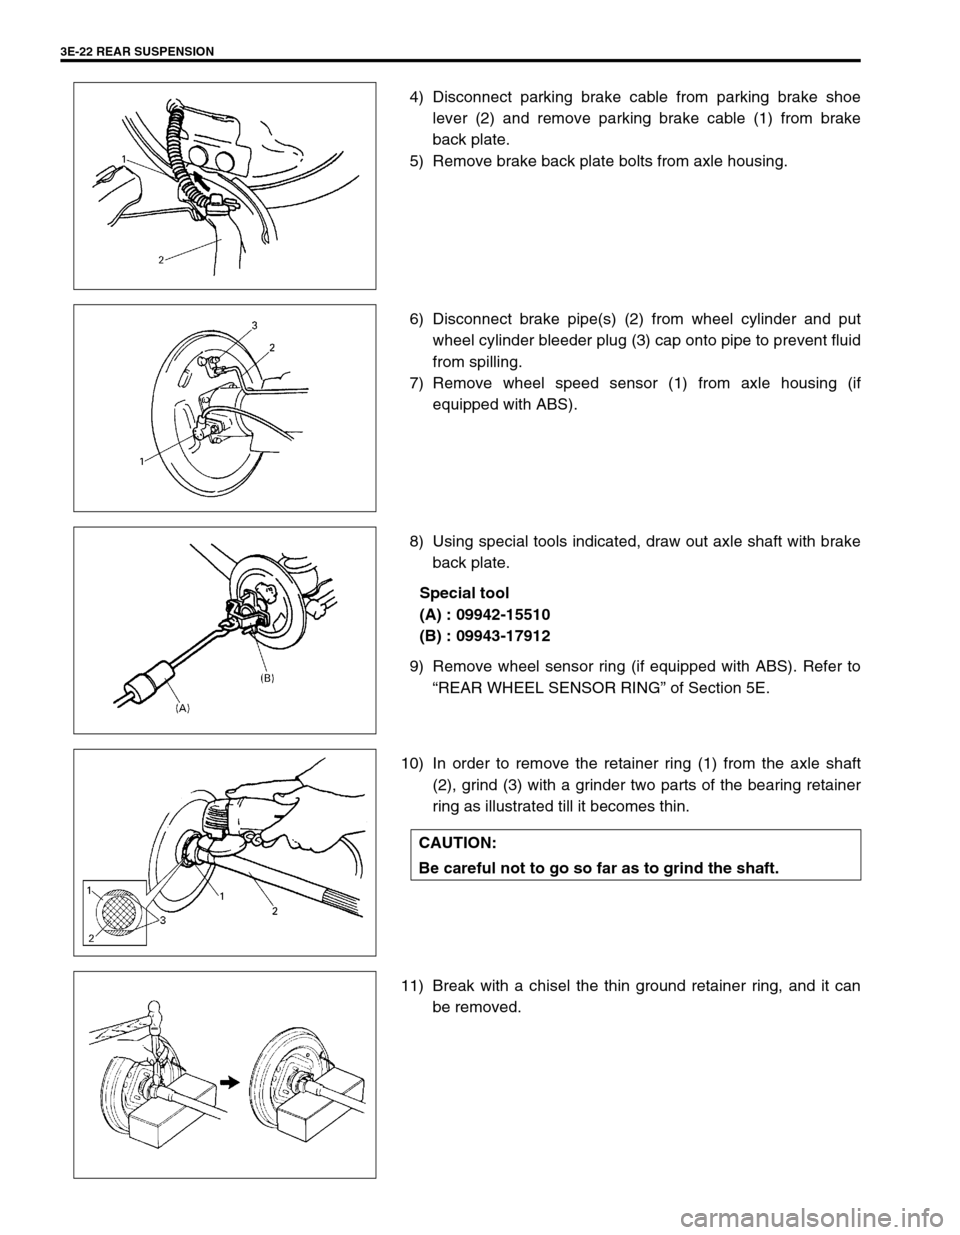 SUZUKI SWIFT 2000 1.G RG413 Service Workshop Manual 3E-22 REAR SUSPENSION
4) Disconnect parking brake cable from parking brake shoe
lever (2) and remove parking brake cable (1) from brake
back plate.
5) Remove brake back plate bolts from axle housing.
